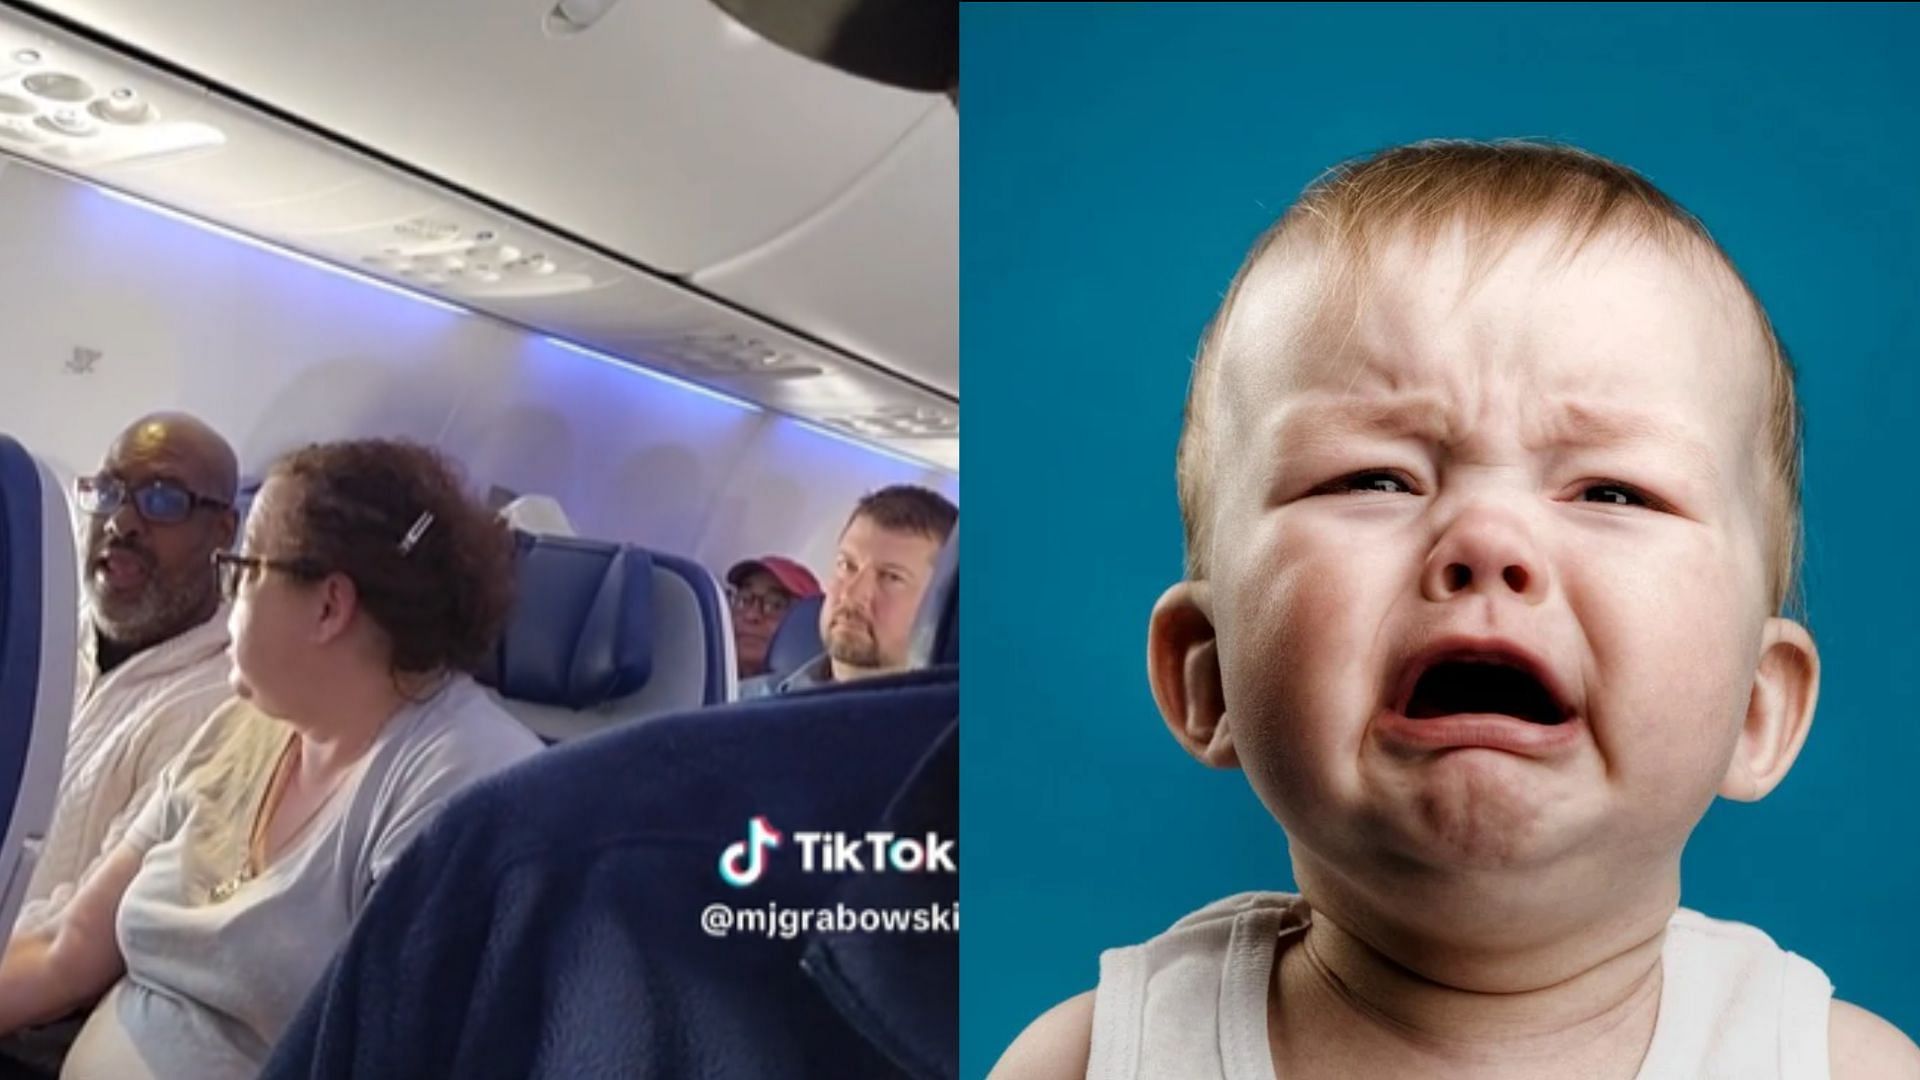 Viral video of man losing it over crying baby inside an airplane sparks hilarious reactions online. (Image via TikTok/@mjgrabowski, iStock Images)